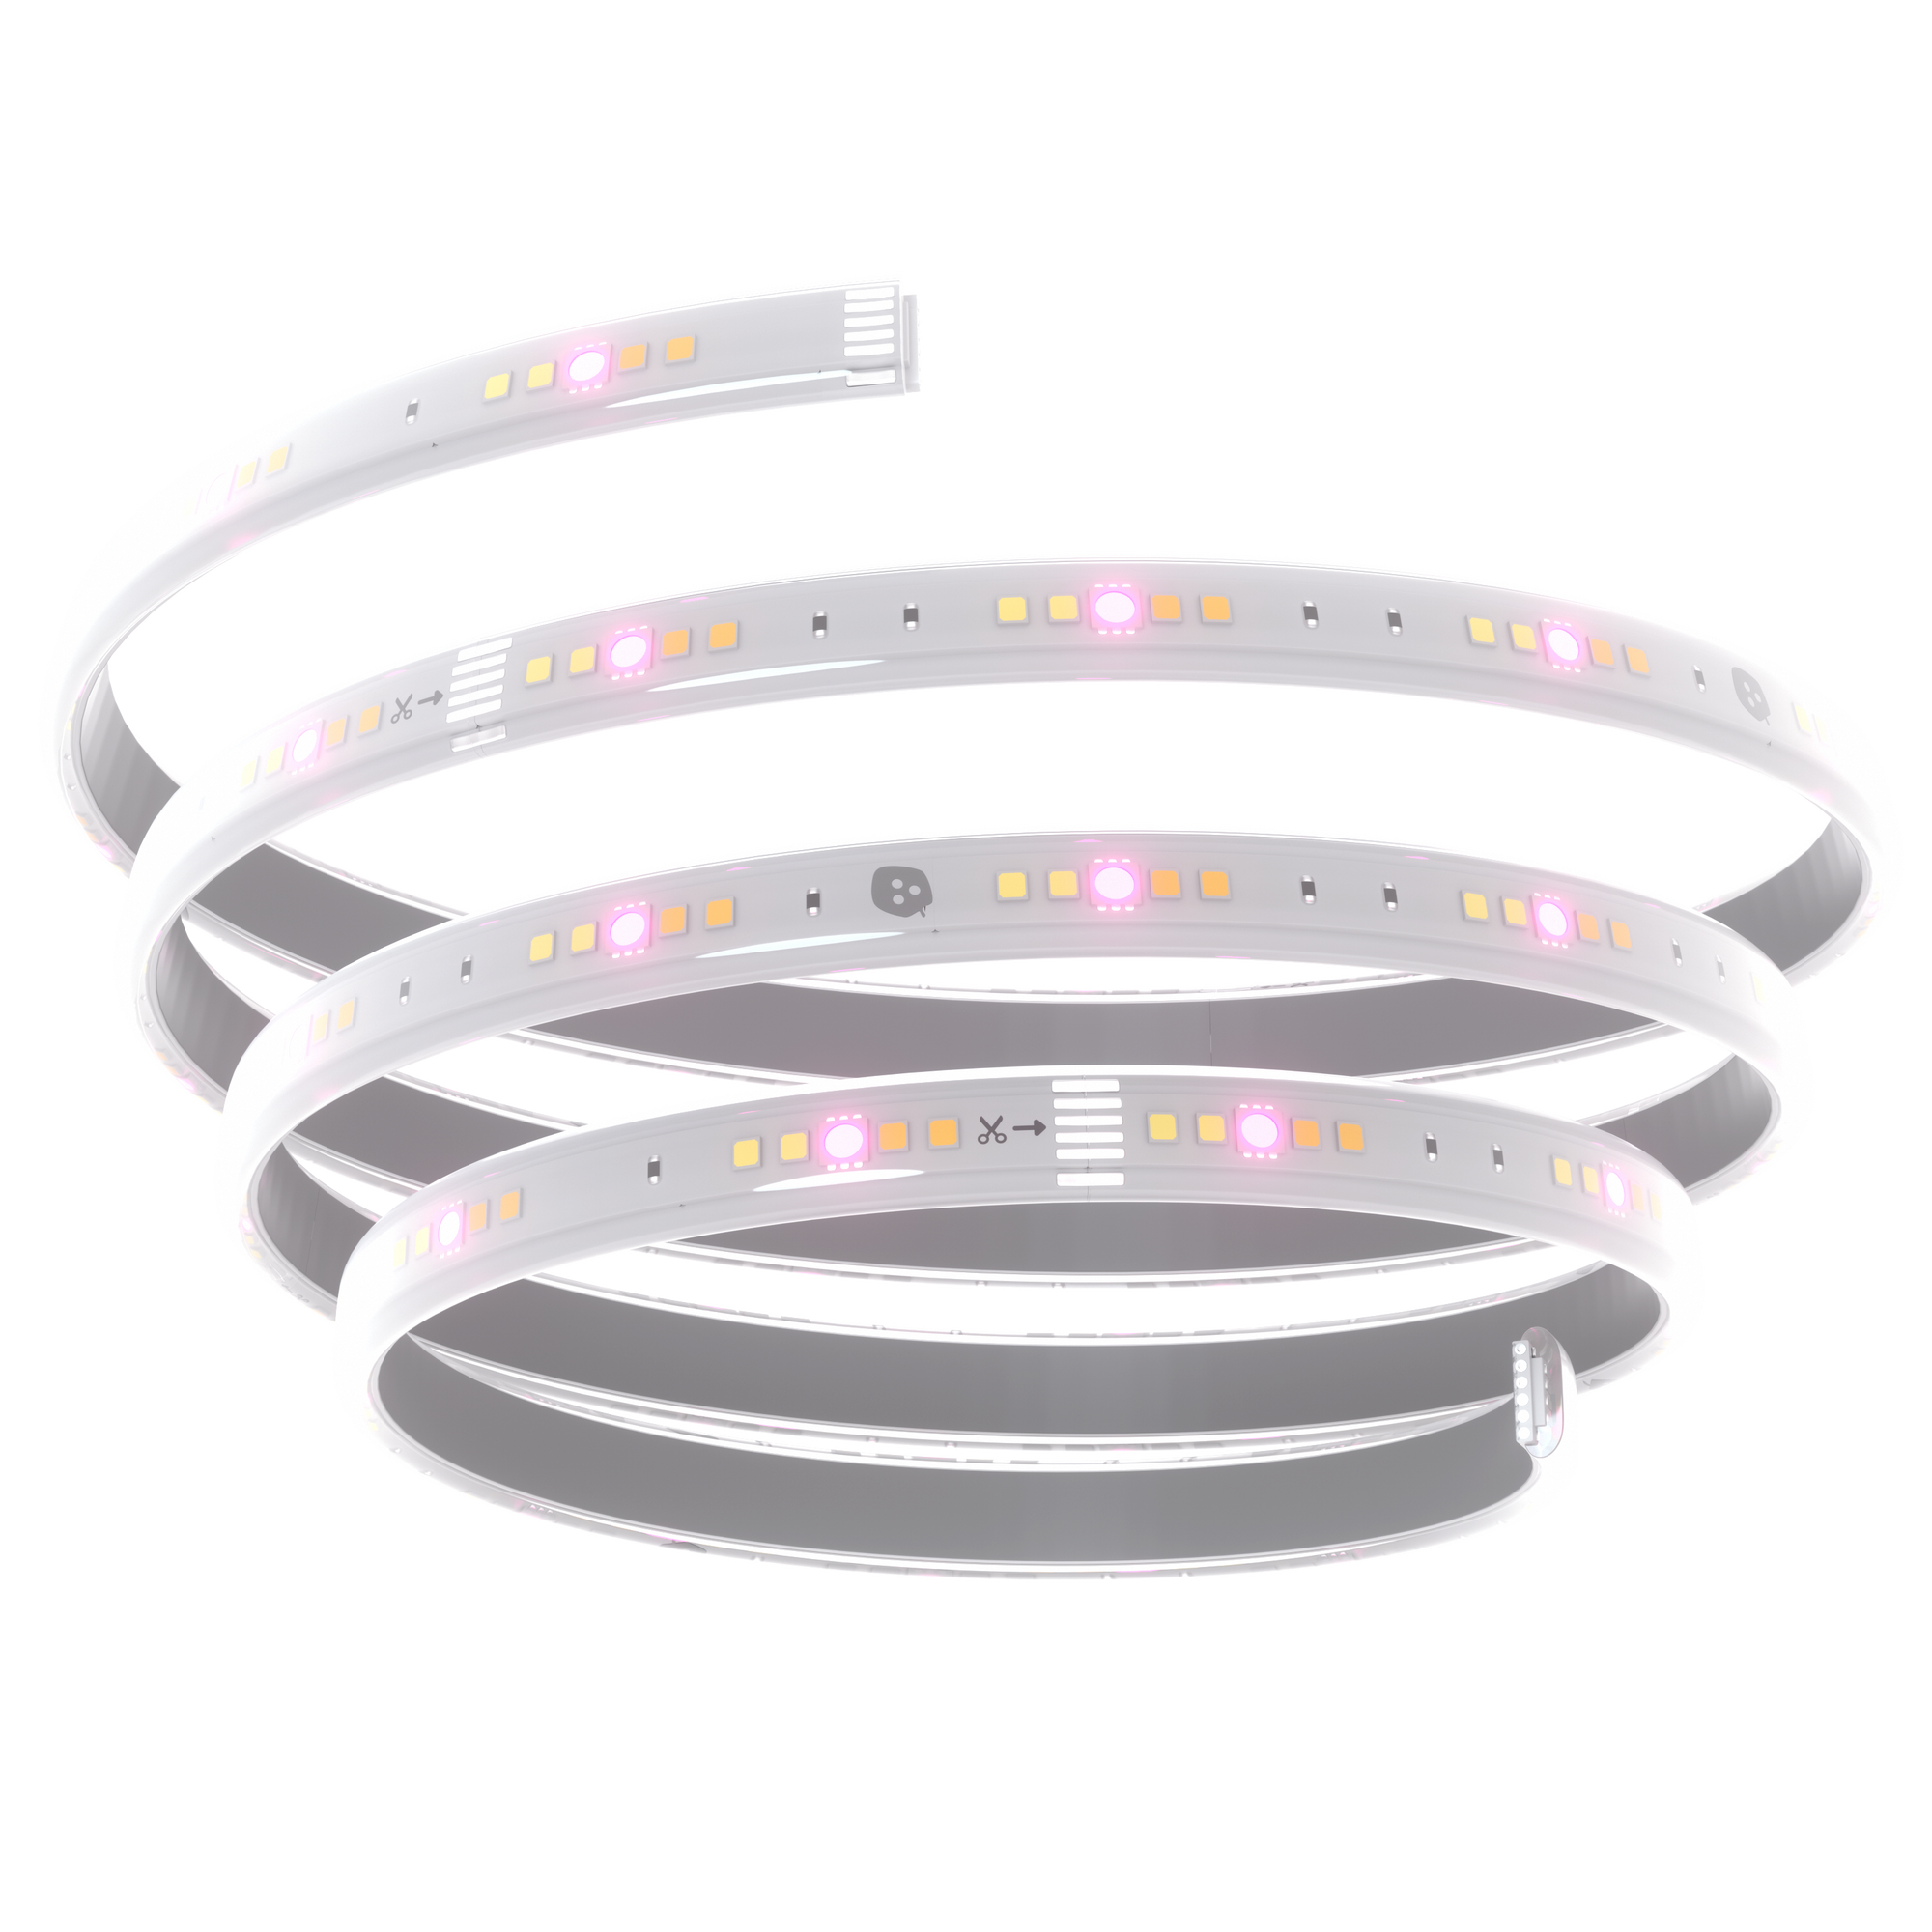 NANOLEAF Essentials Smart Lightstrip Expansion 40" Color Changing RGBCW Bluetooth/Thread Enabled - 1 Meter - White (Controller not included)